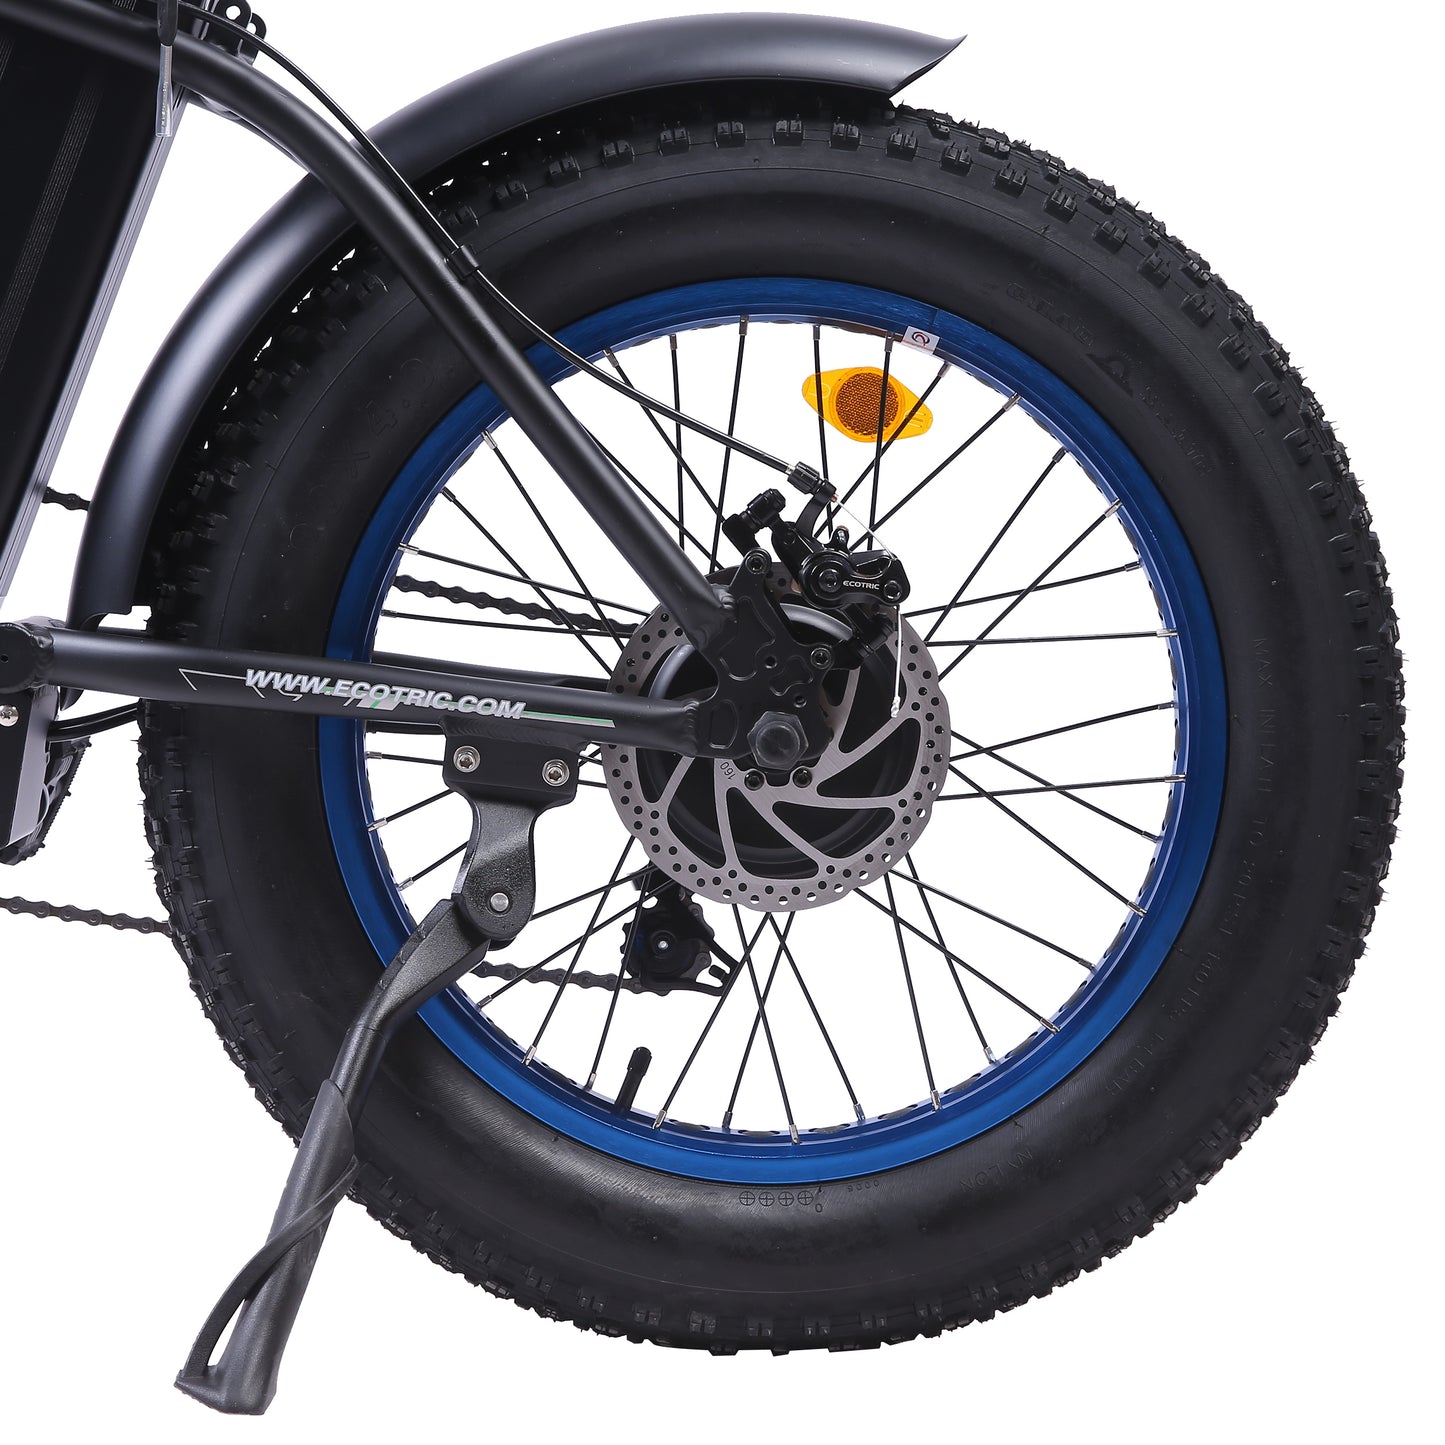 UL Certified - Ecotric Fat Tire Portable and Folding Electric Bike - Black and Blue